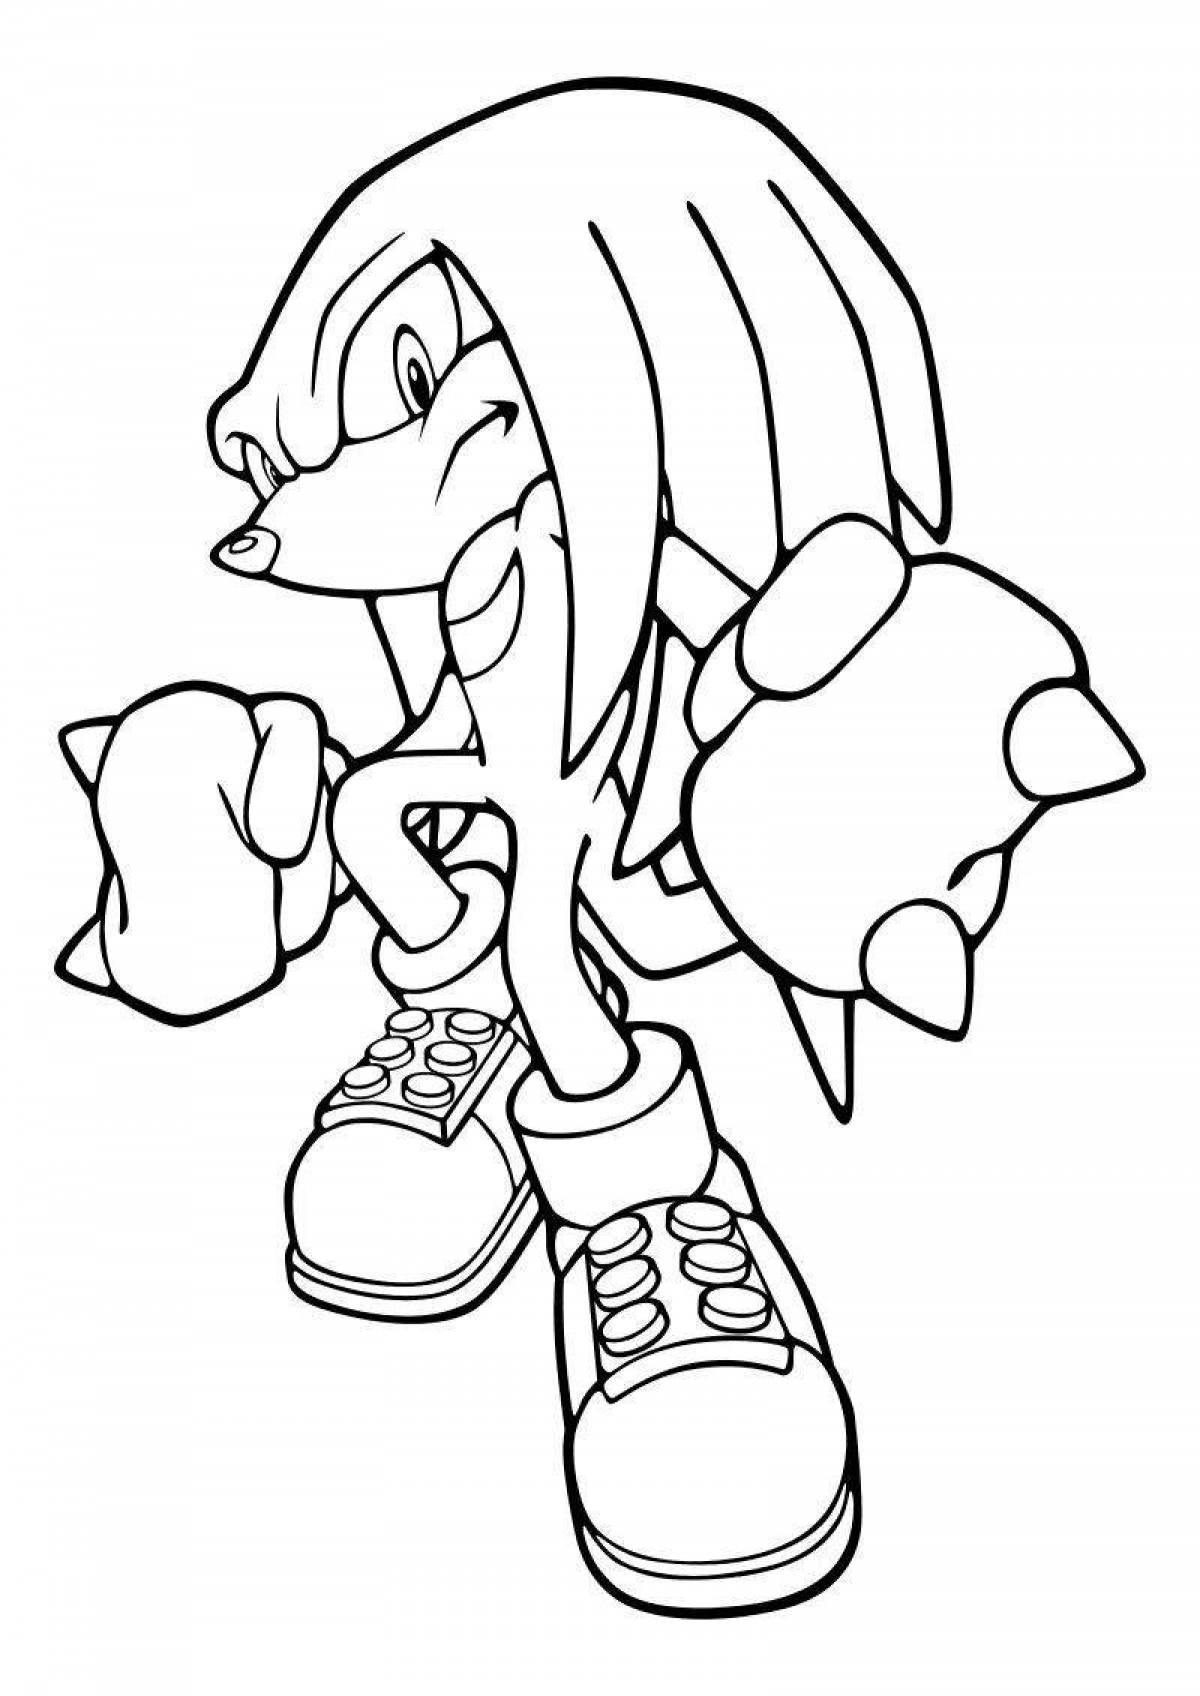 Knuckles the echidna coloring book